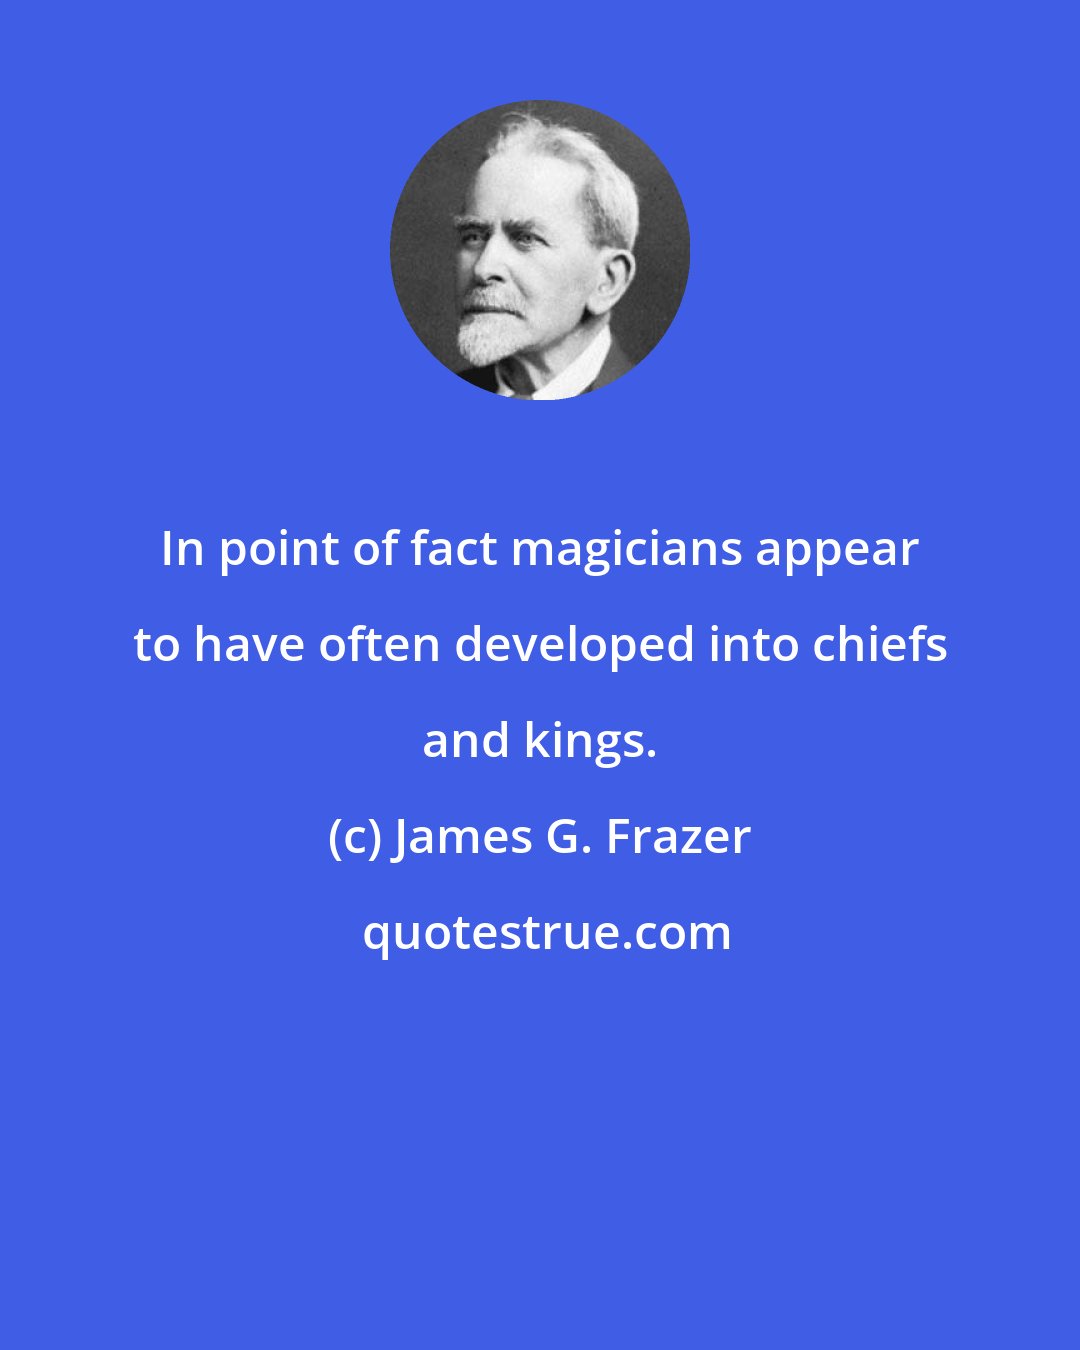 James G. Frazer: In point of fact magicians appear to have often developed into chiefs and kings.